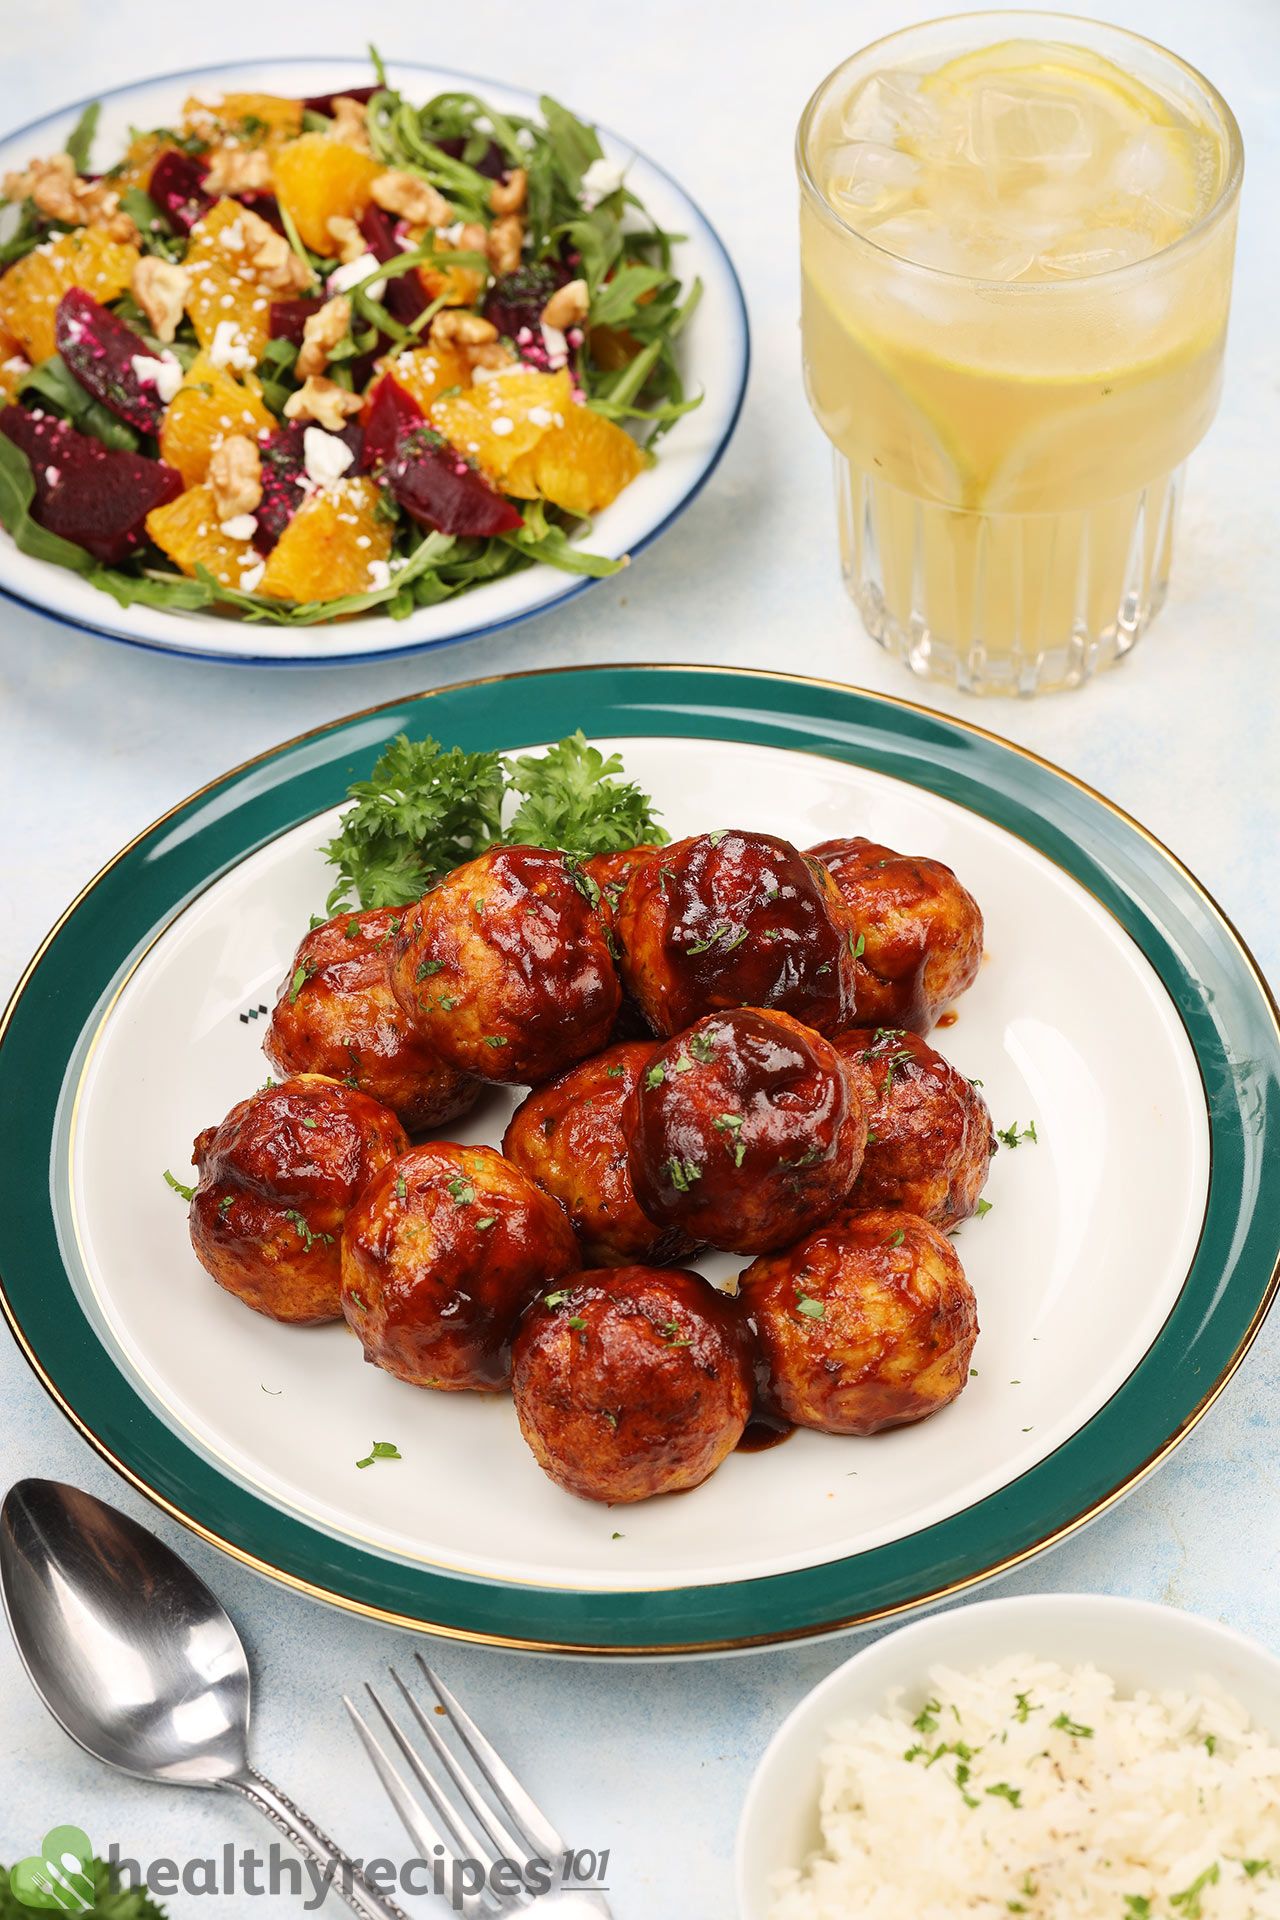 What to Serve With Chicken Meatballs